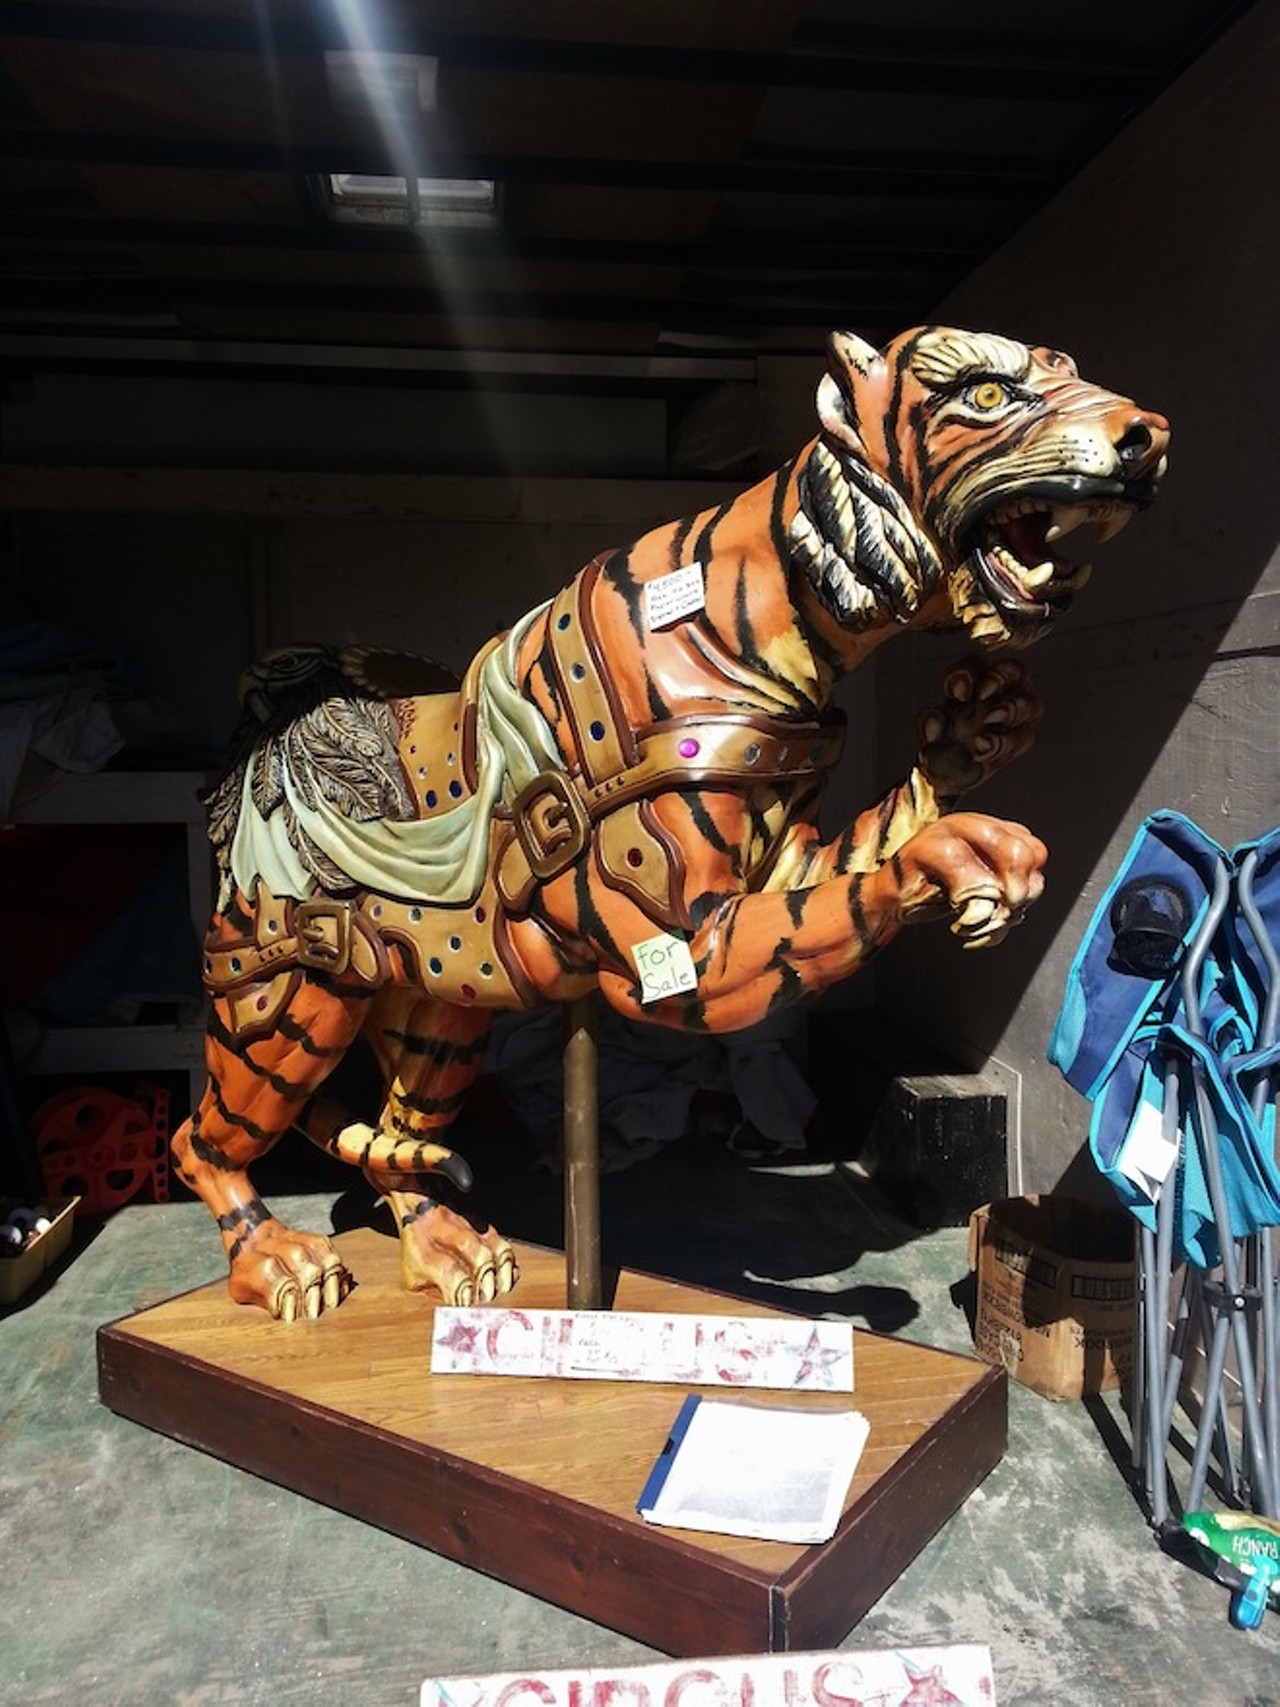 Hand-carved tiger, of course.